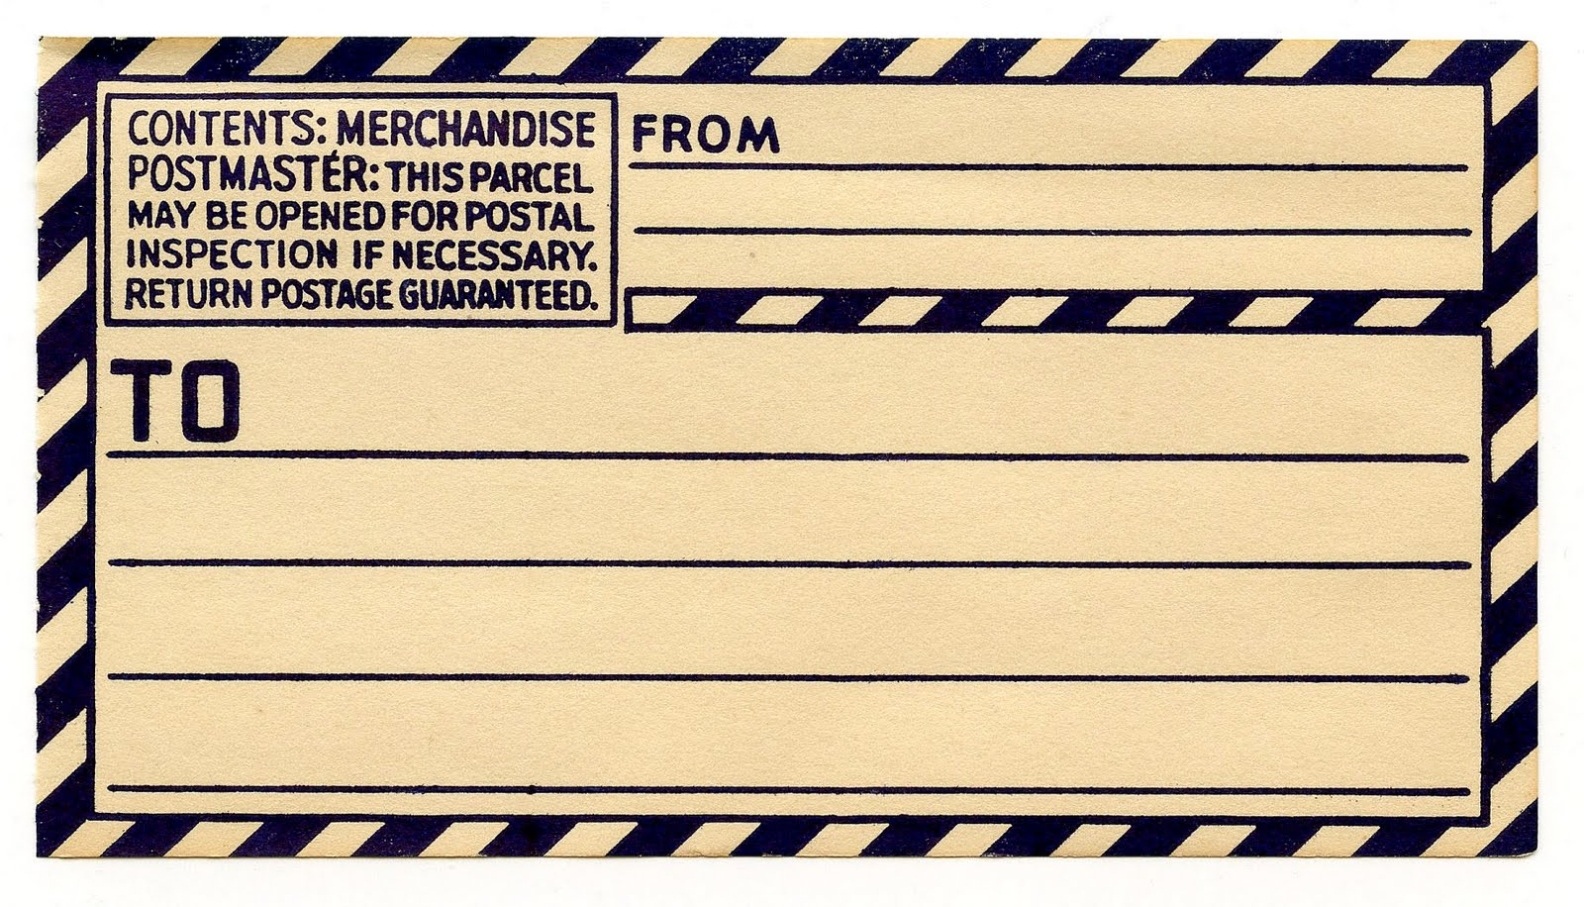 Vintage Clip Art - Old Gummed Parcel Post Label - The Graphics Fairy With Package Address Label Template